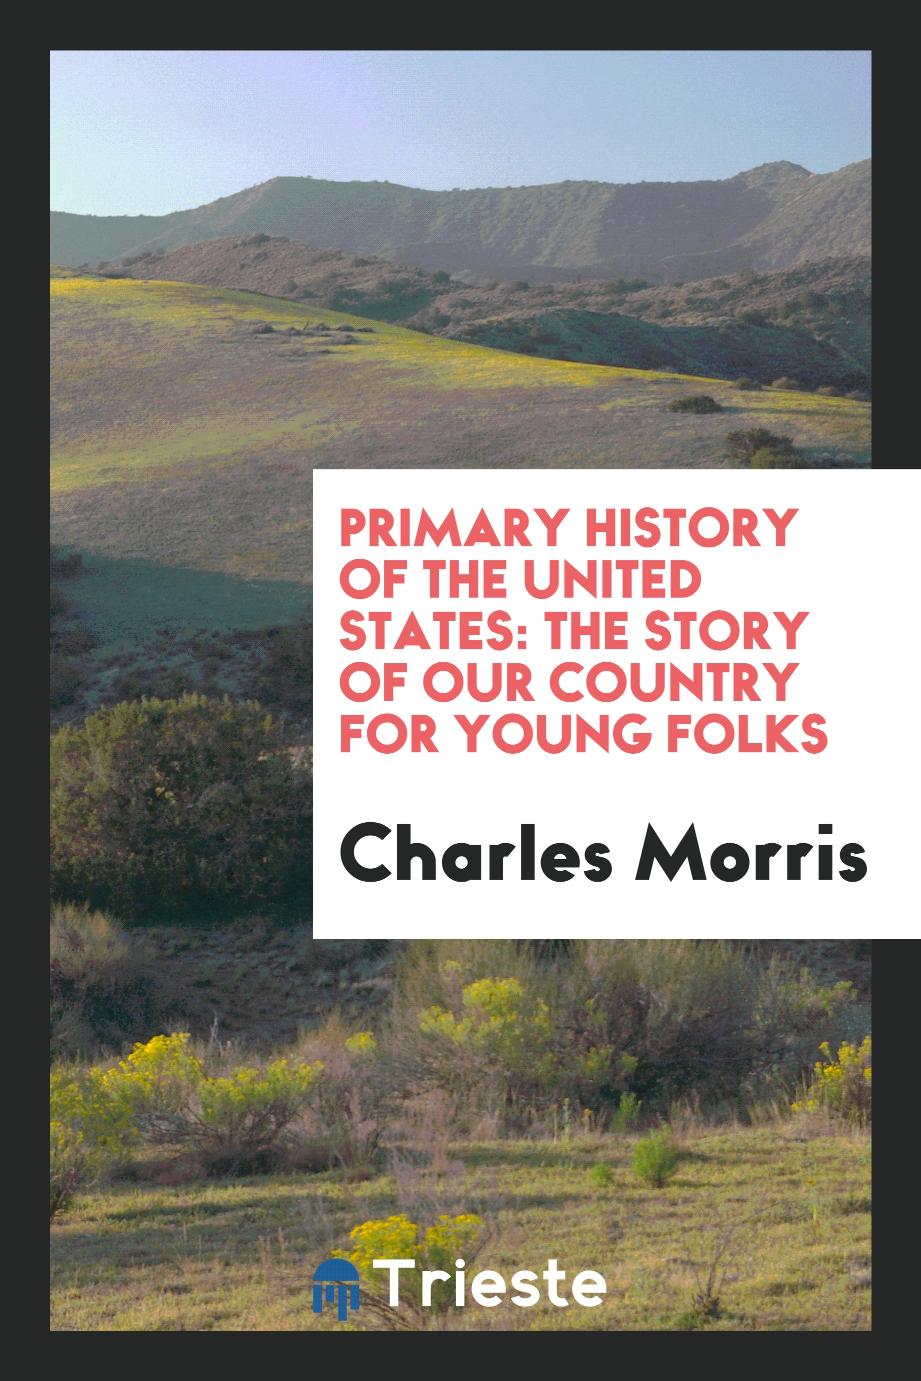 Primary History of the United States: The Story of Our Country for Young Folks